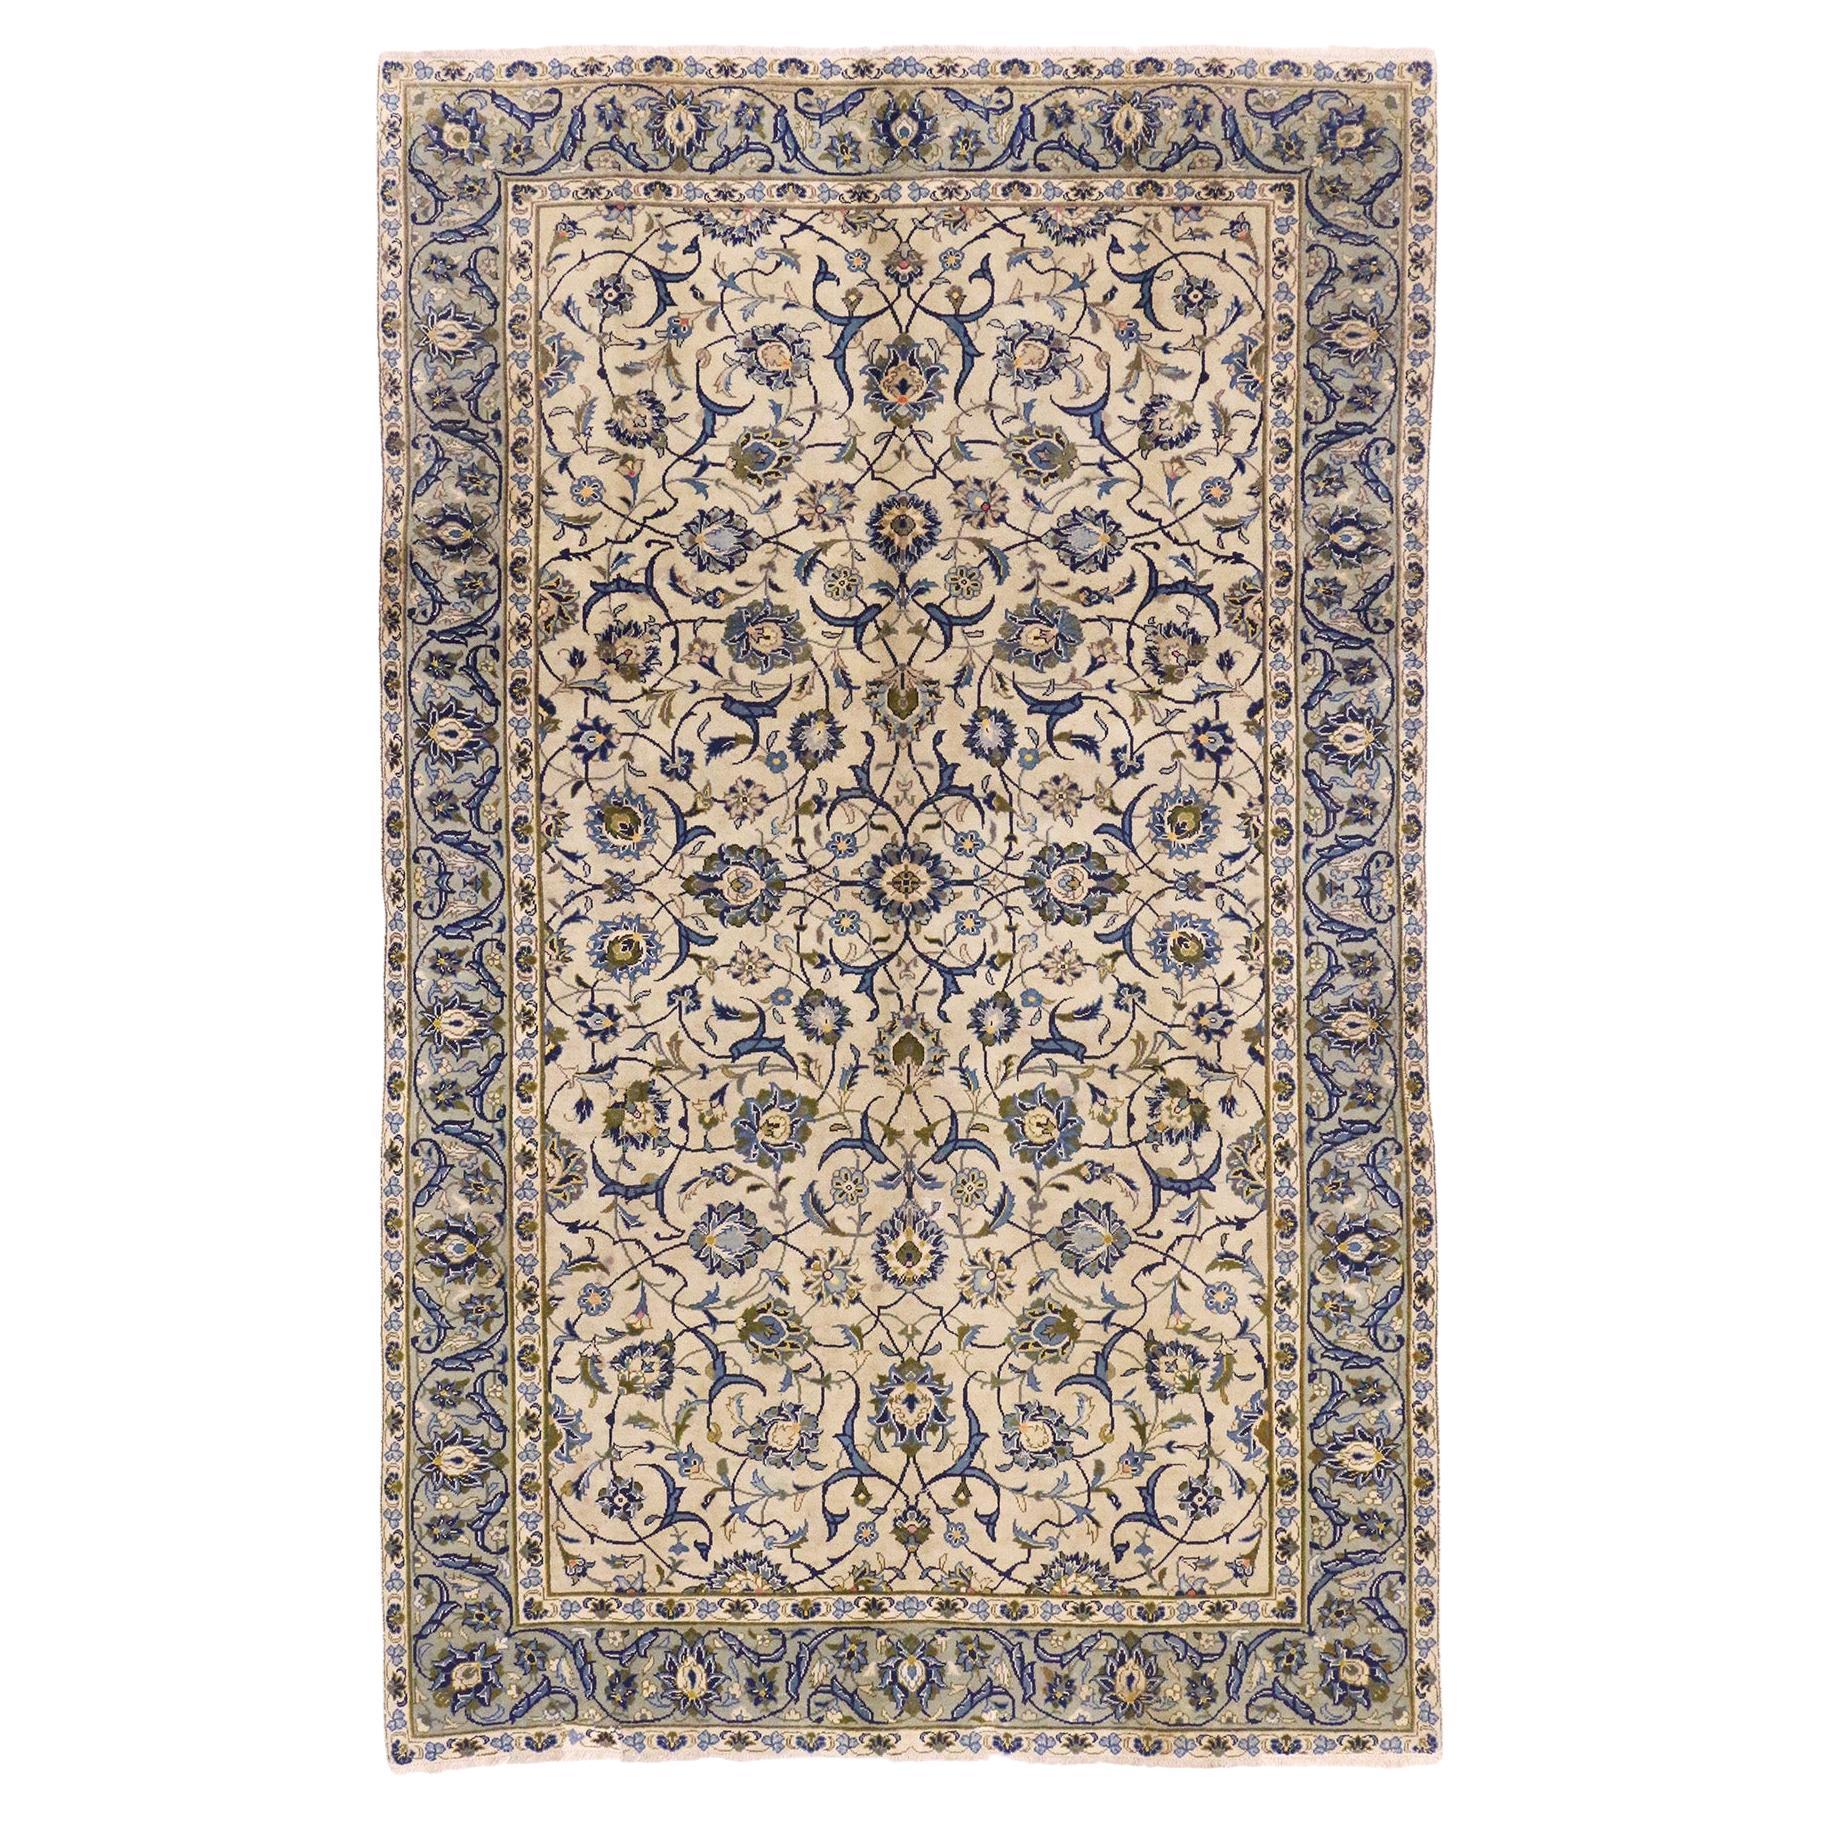 Vintage Ivory Persian Yazd Rug, Timeless Sophistication Meets Neoclassical Style